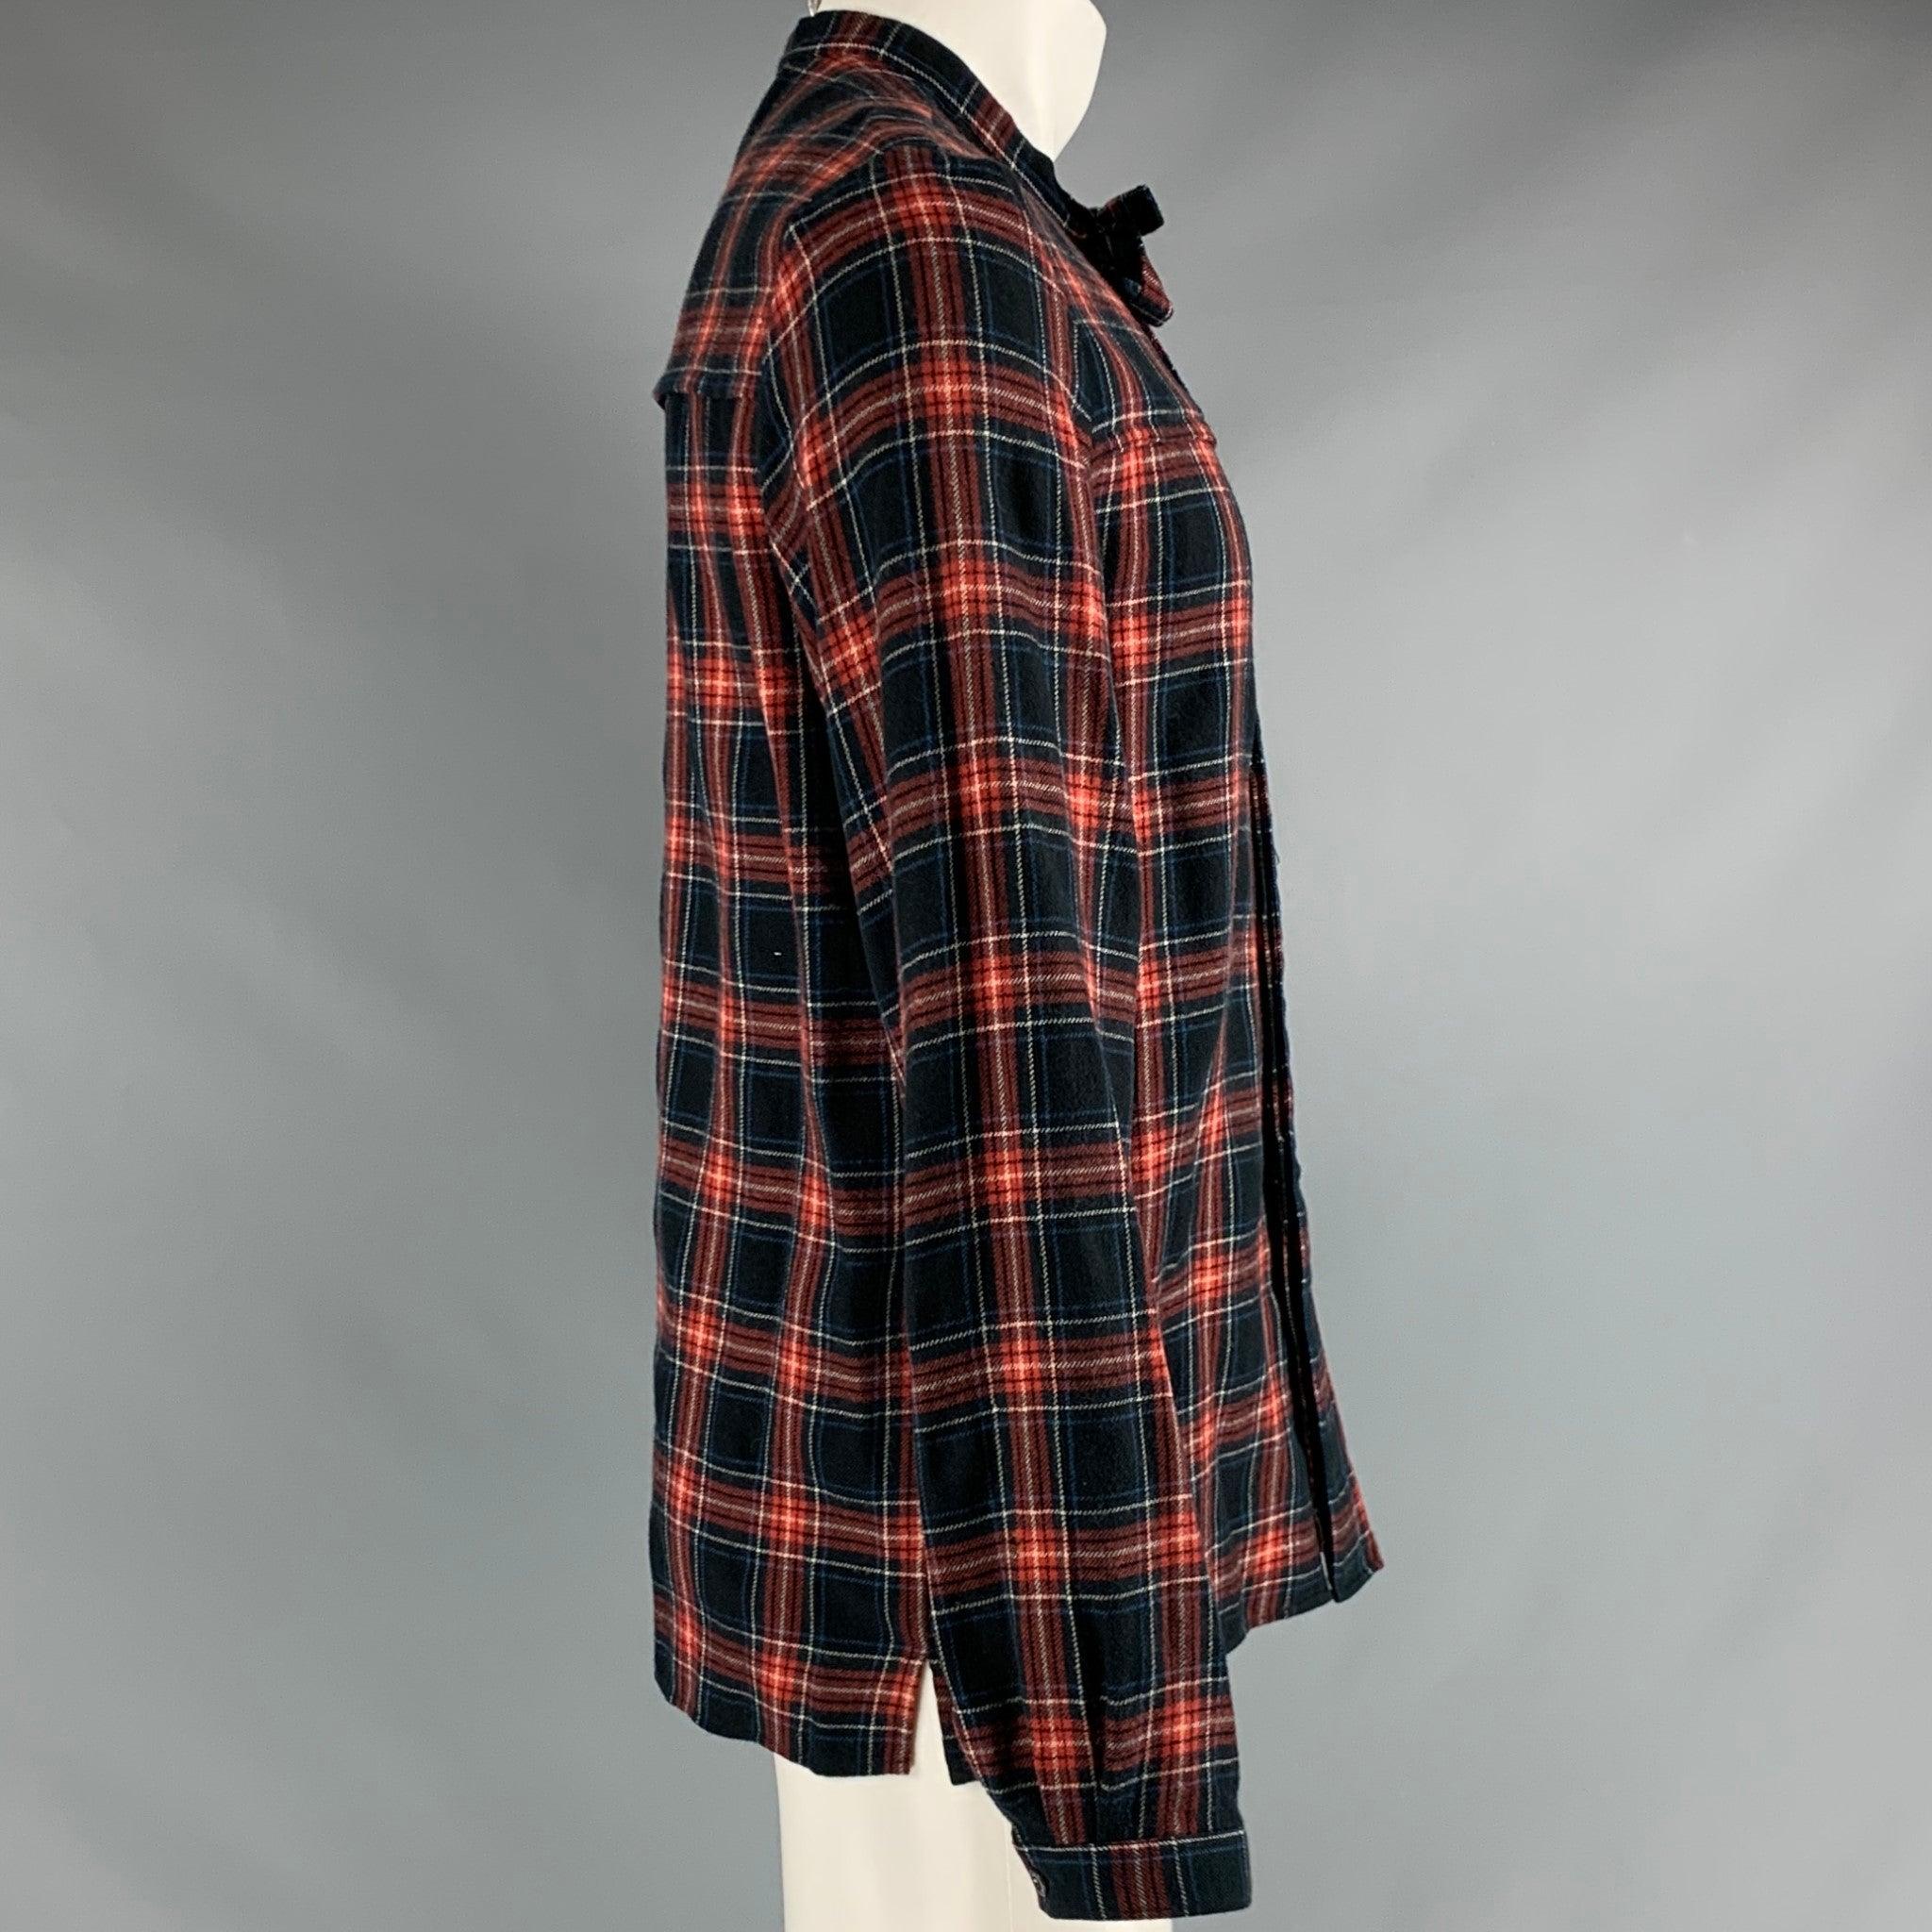 GUCCI long sleeve shirt
in a black red and blue cotton fabric featuring plaid pattern, neck bow, and hidden button closure. Made in Italy.Very Good Pre-Owned Condition. Minor signs of wear. 

Marked:   IT 50 

Measurements: 
 
Shoulder: 17.5 inches